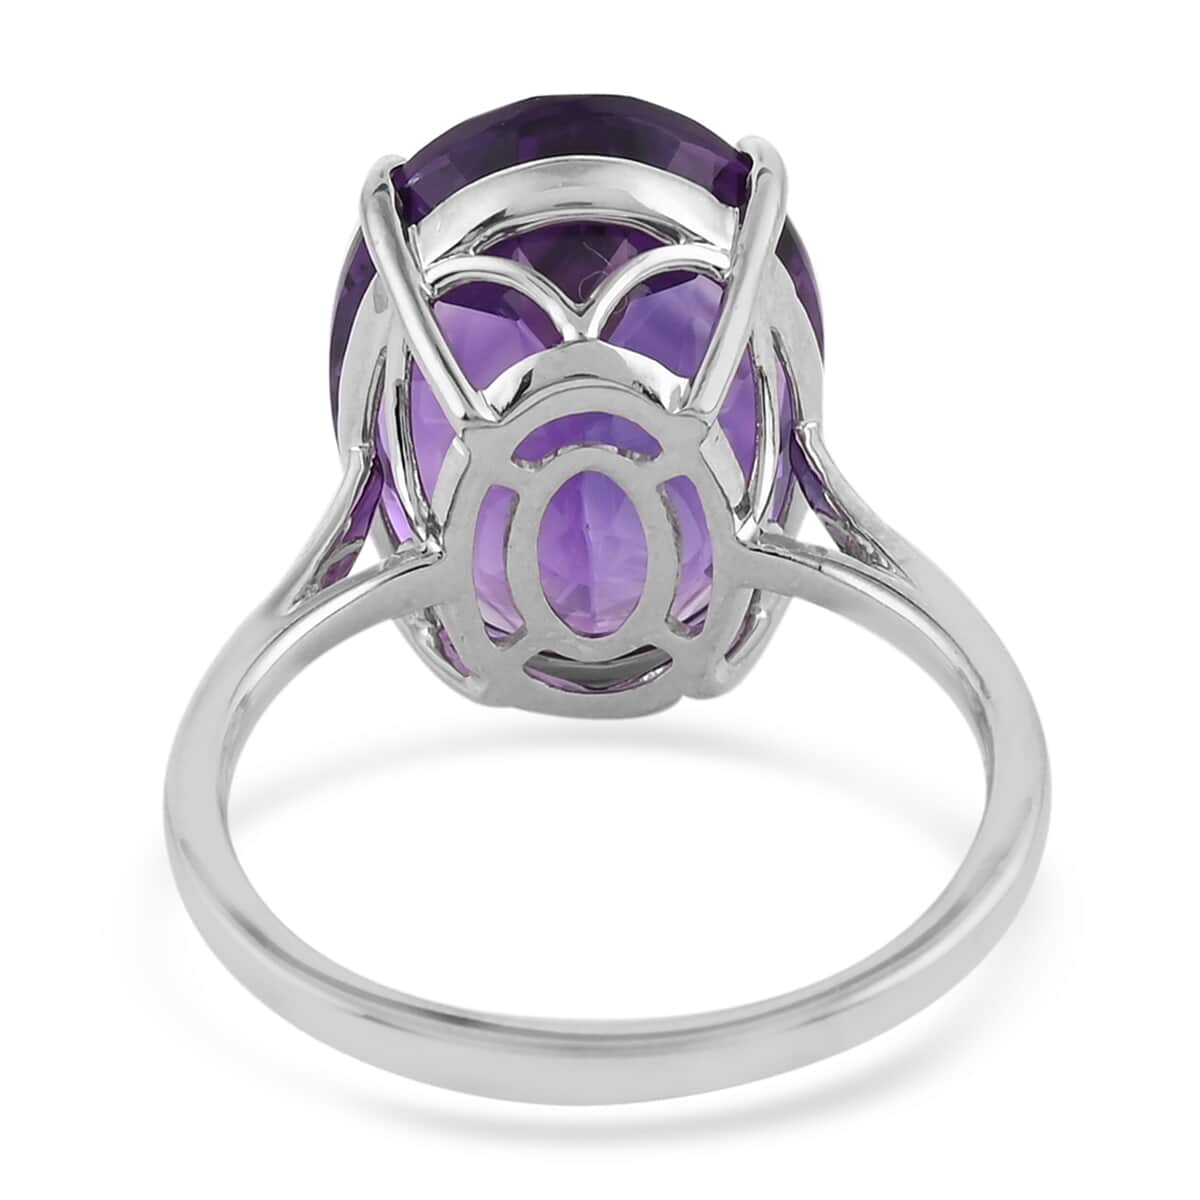 LUXORO 10K White Gold AAA Lusaka Amethyst Solitaire Ring (2.75 g) 9.15 ctw image number 3